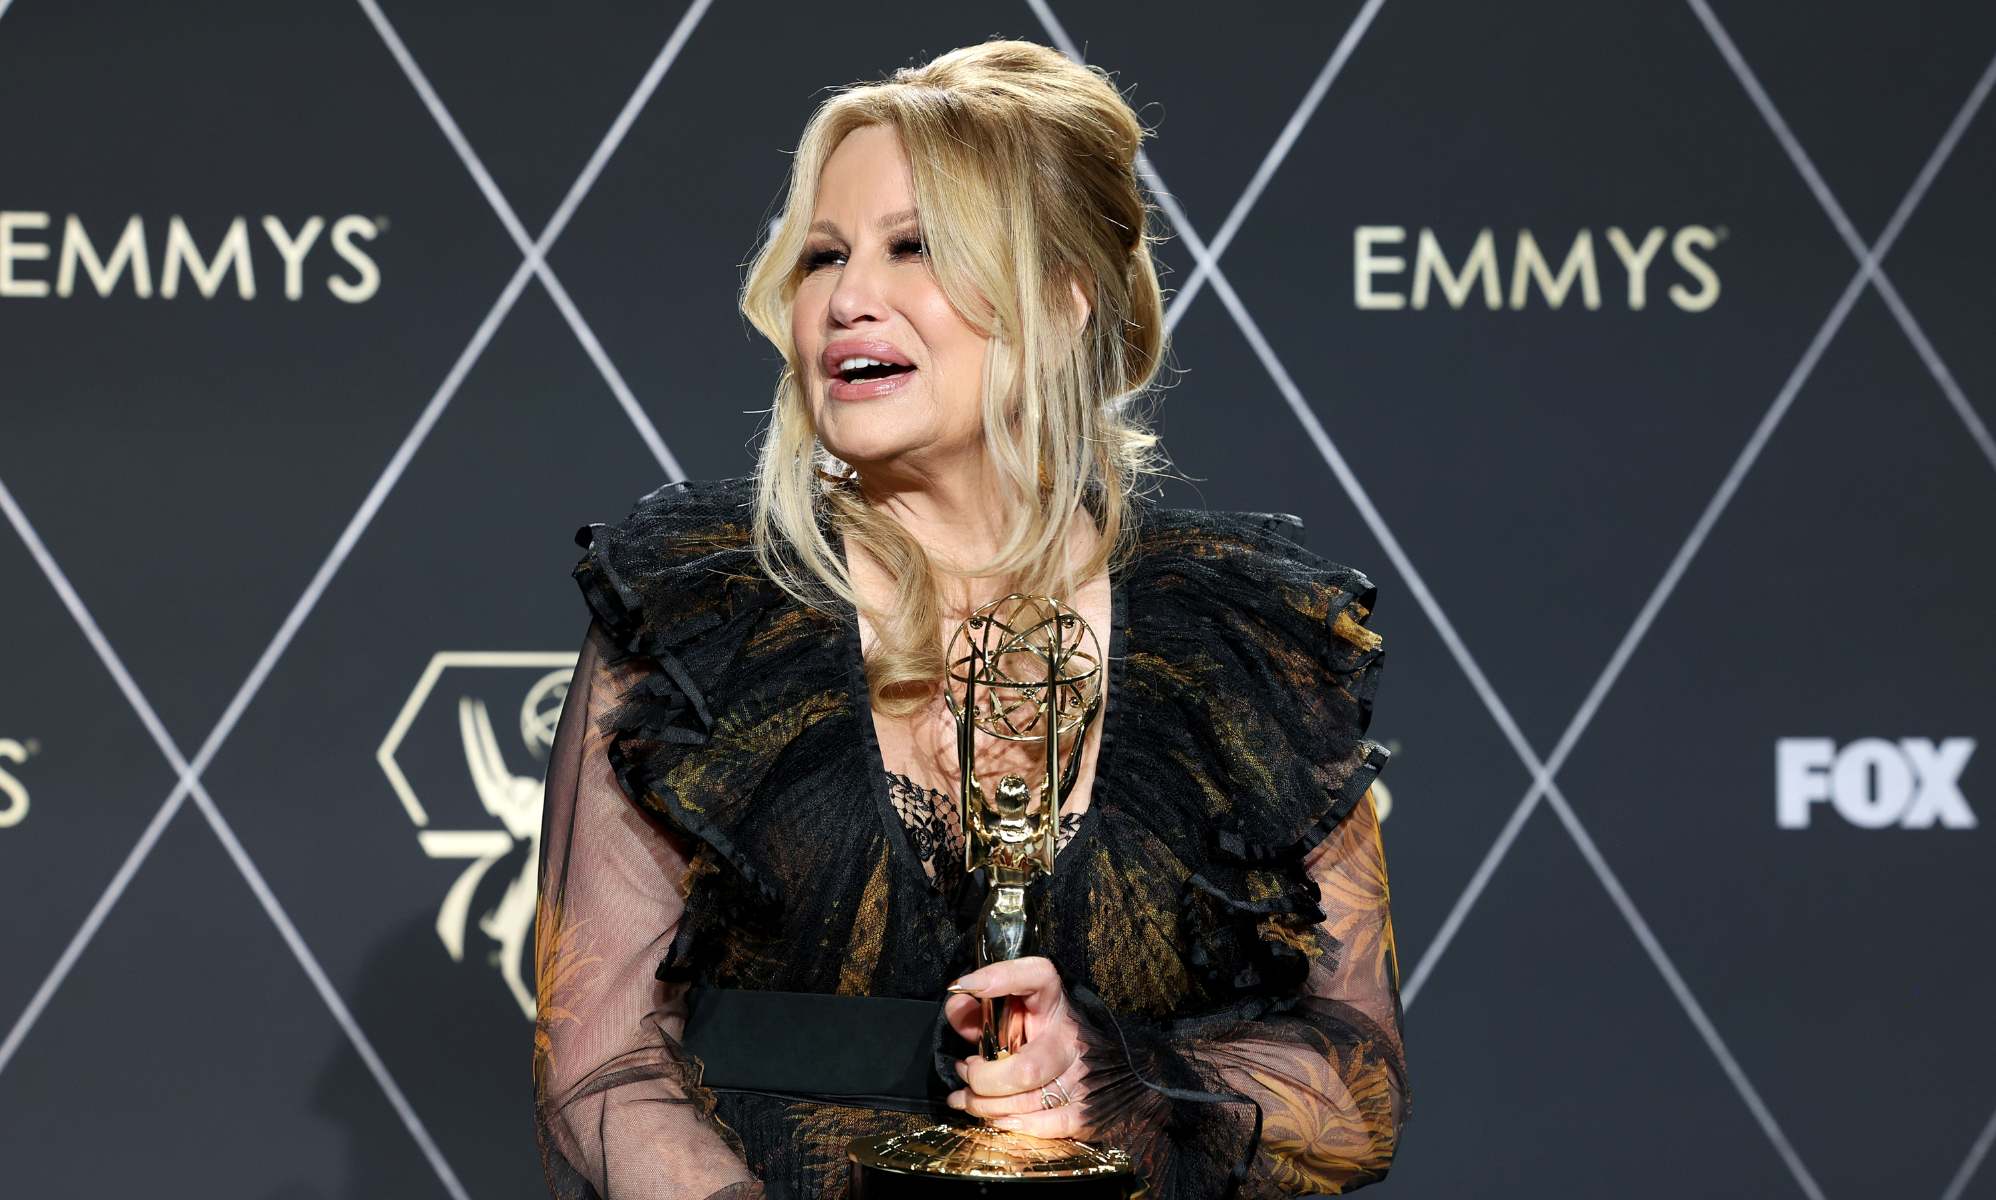 Jennifer Coolidge thanks 'all the evil gays' in Emmy speech